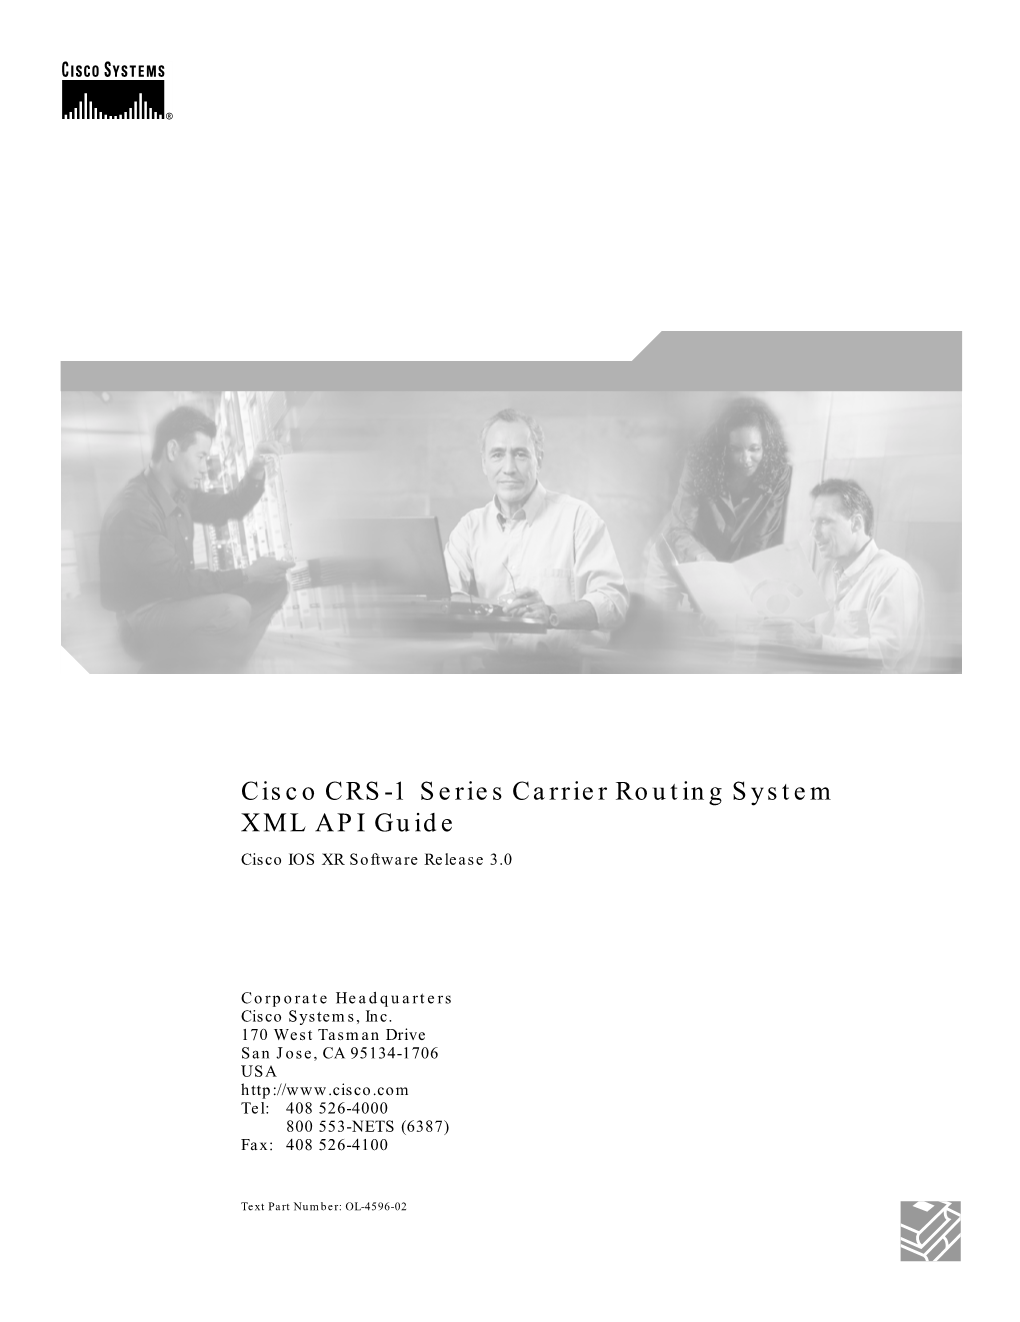 Cisco CRS-1 Series Carrier Routing System XML API Guide Cisco IOS XR Software Release 3.0